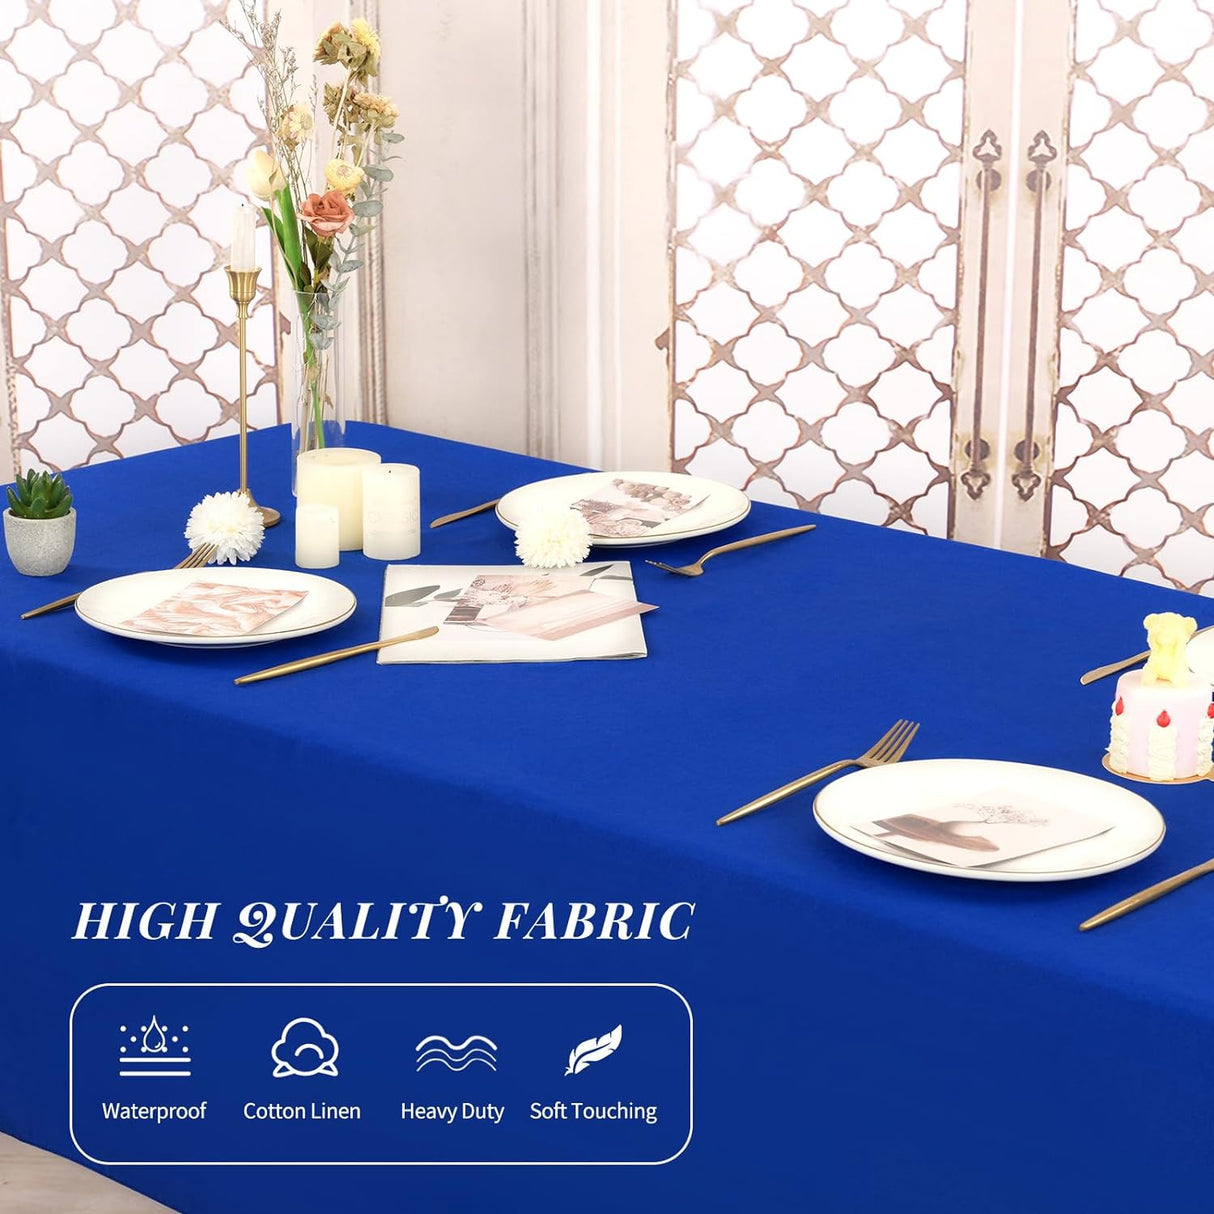 Tablecloth  Polyester Table Cloth for 6 Foot Rectangle Tables,Stain and Wrinkle Resistant Washable Fabric Table Covers Polyester Beige Table Clothes for Wedding,Party,Banquet